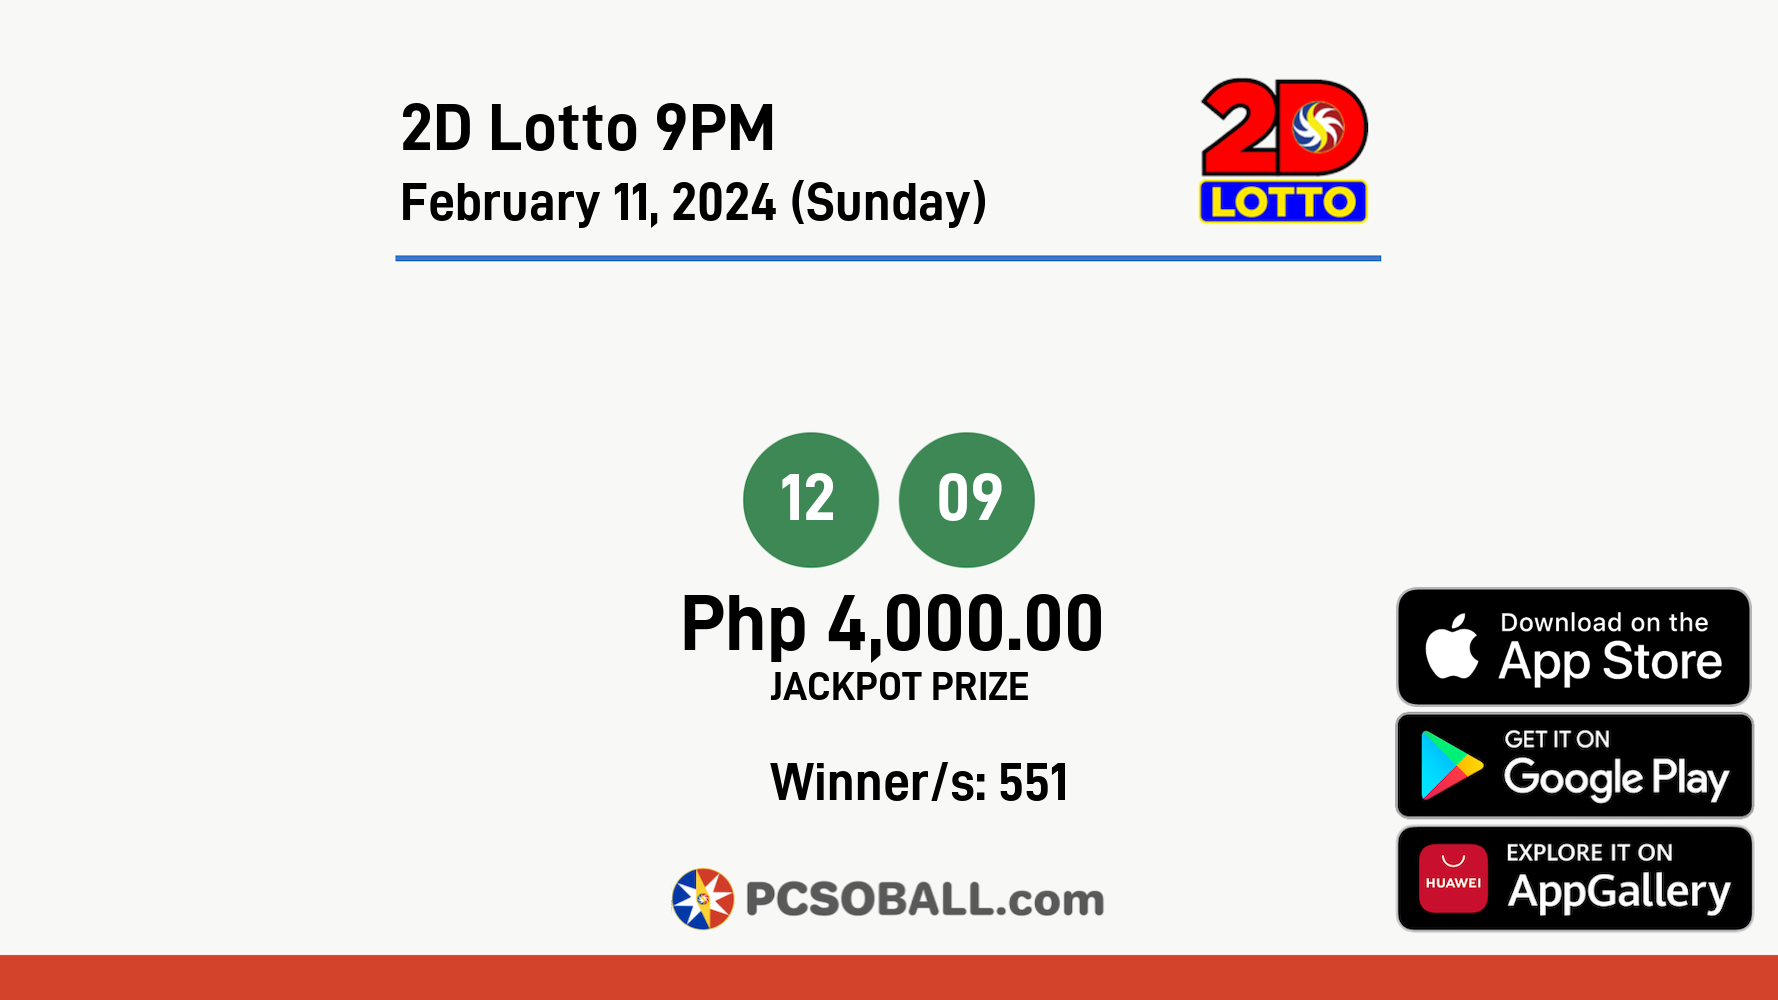 2D Lotto 9PM February 11, 2024 (Sunday) Result